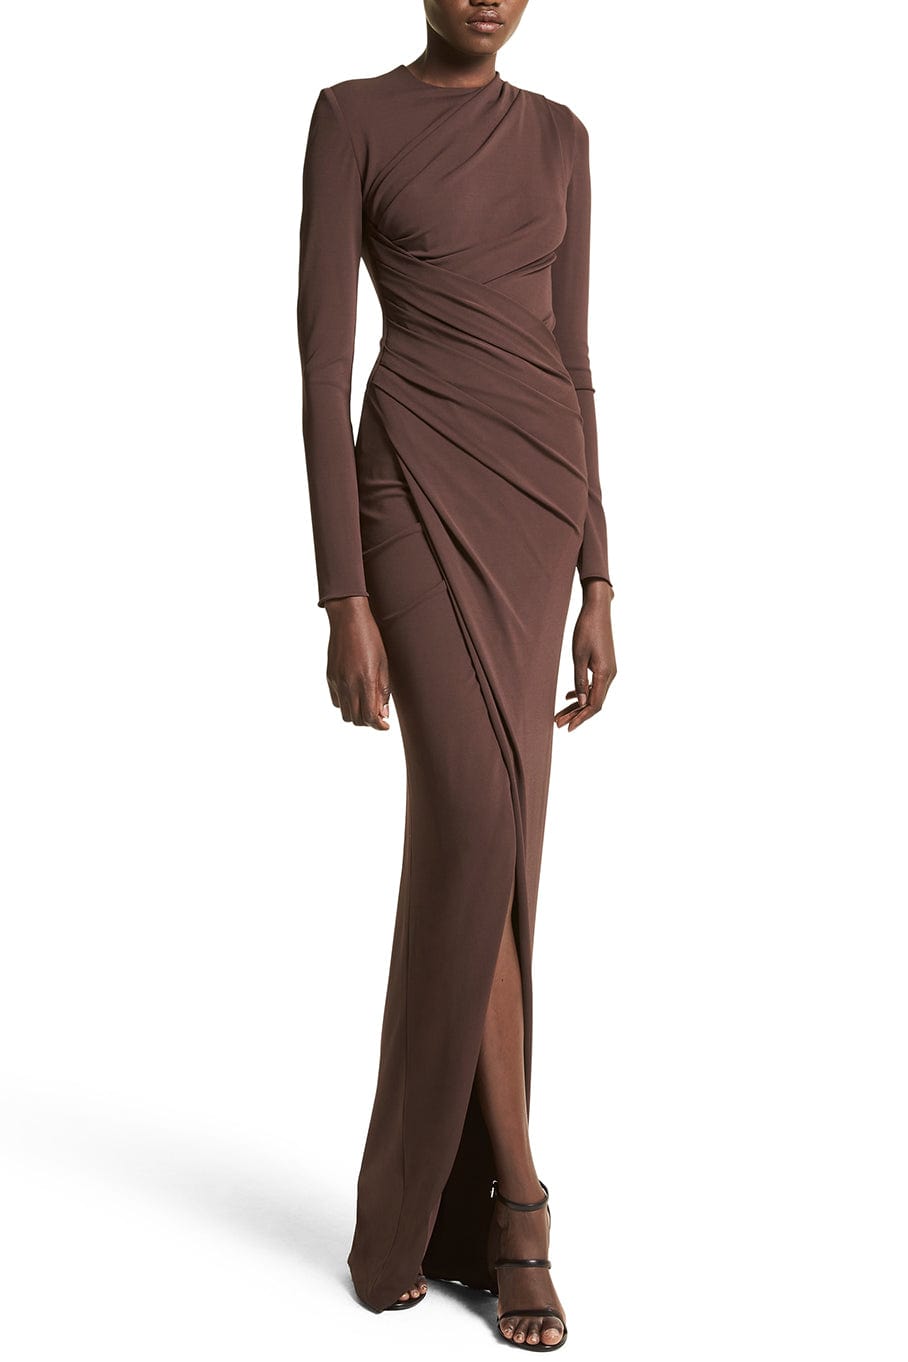 MICHAEL KORS COLLECTION-Ruched Long Sleeve Gown-